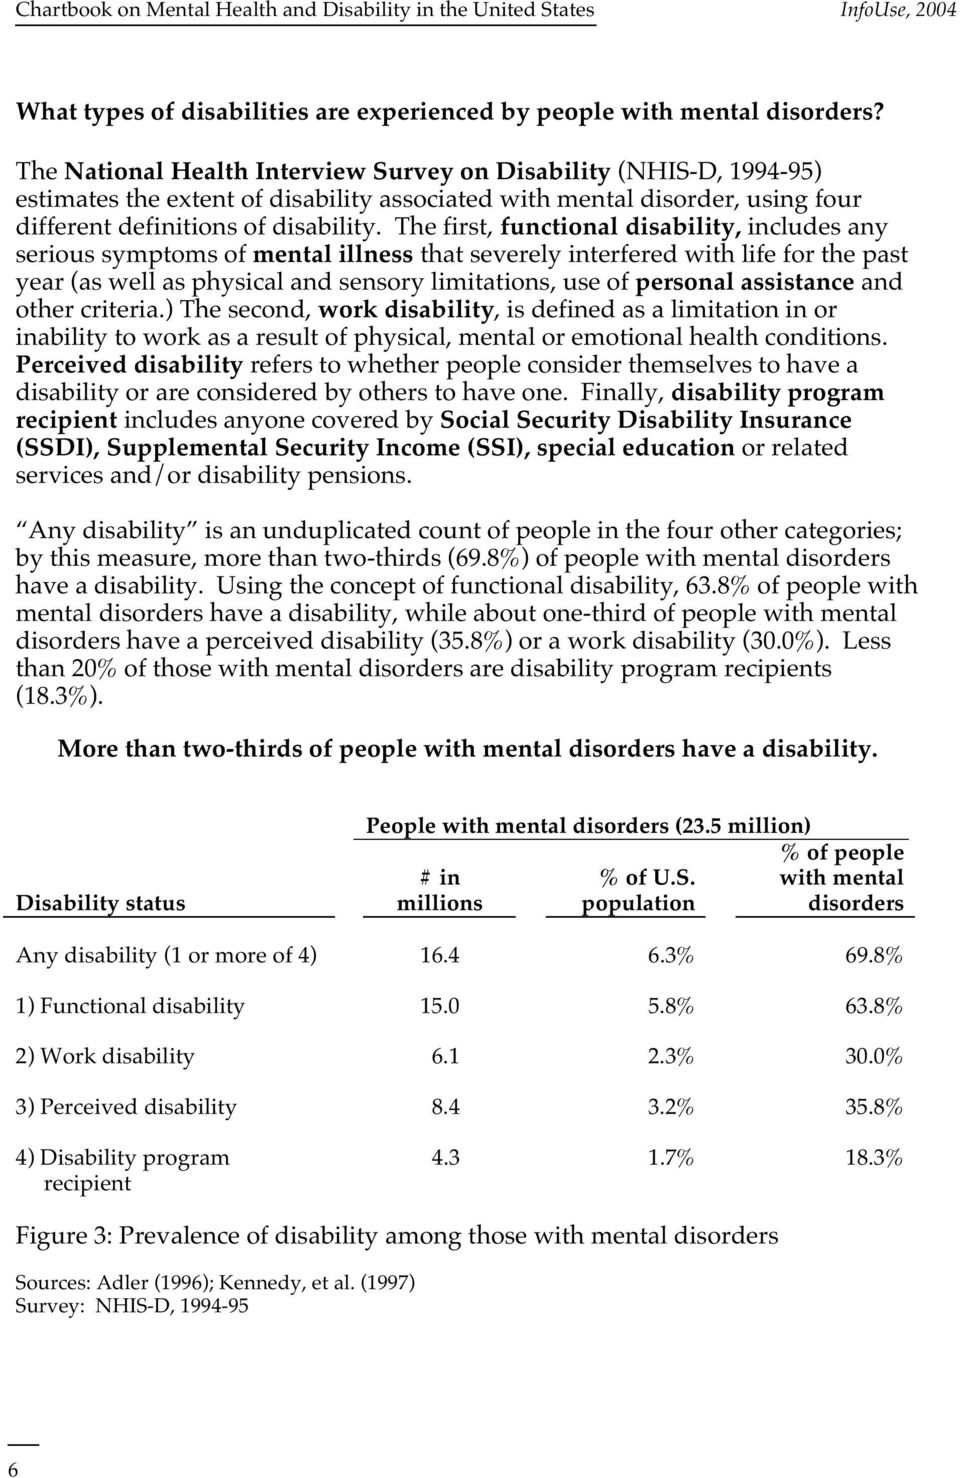 The first, functional disability, includes any serious symptoms of mental illness that severely interfered with life for the past year (as well as physical and sensory limitations, use of personal